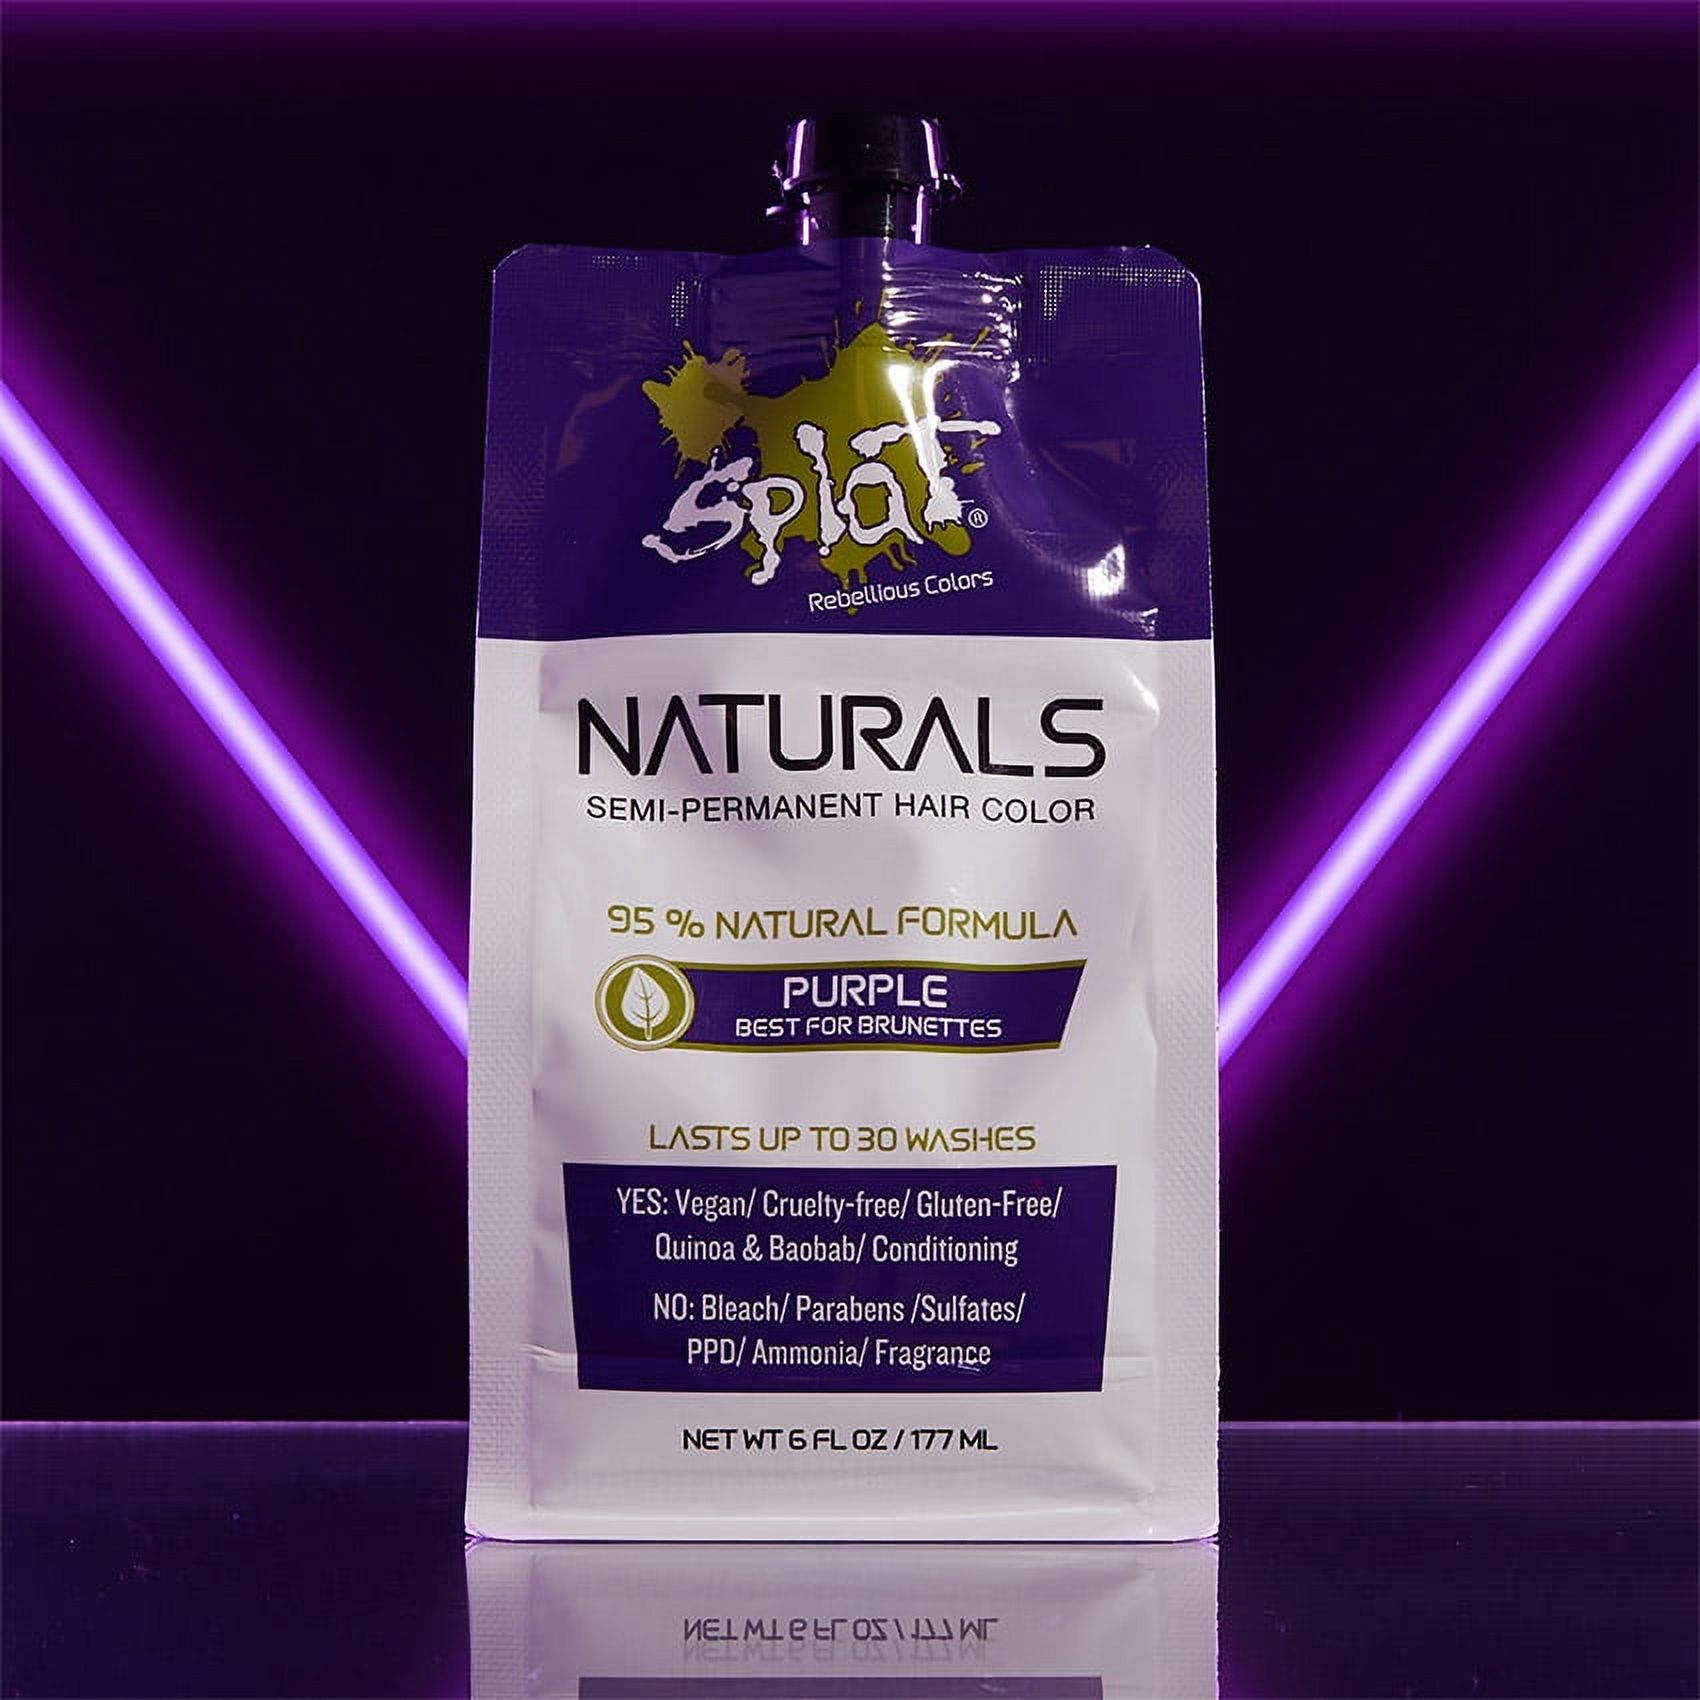 Splat Naturals Conditioning Hair Color, Semi-Permanent Hair Dye, Purple, 6 fl oz Pouch - image 2 of 4